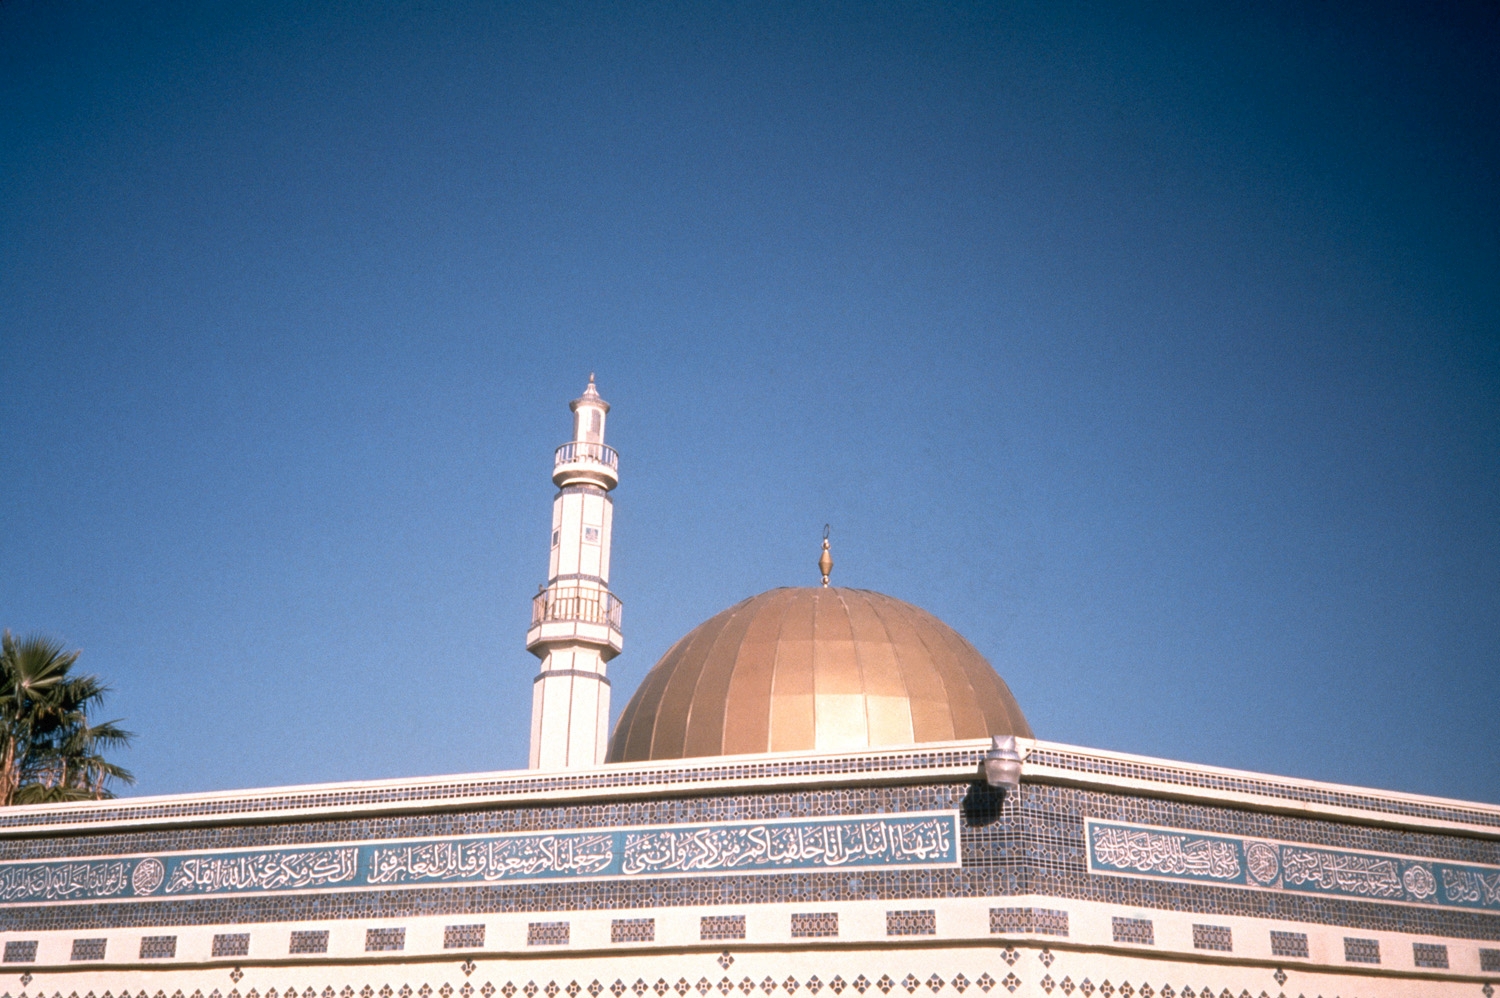 Islamic Community Center of Tempe - Roofline with inscriptions, minaret, and gold dome